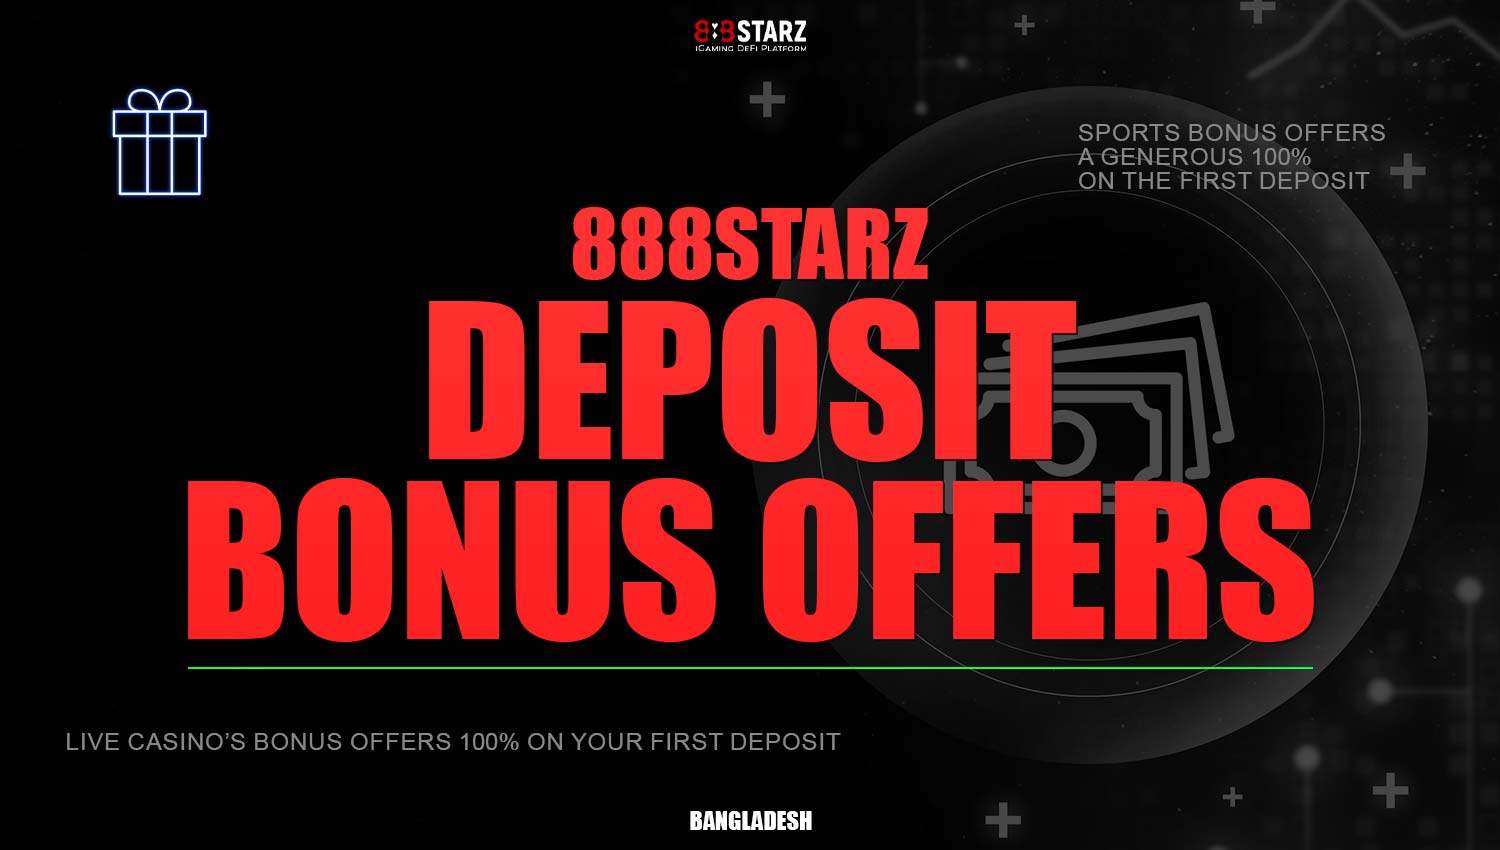 888Starz offers deposit bonuses for players from Bangladesh.